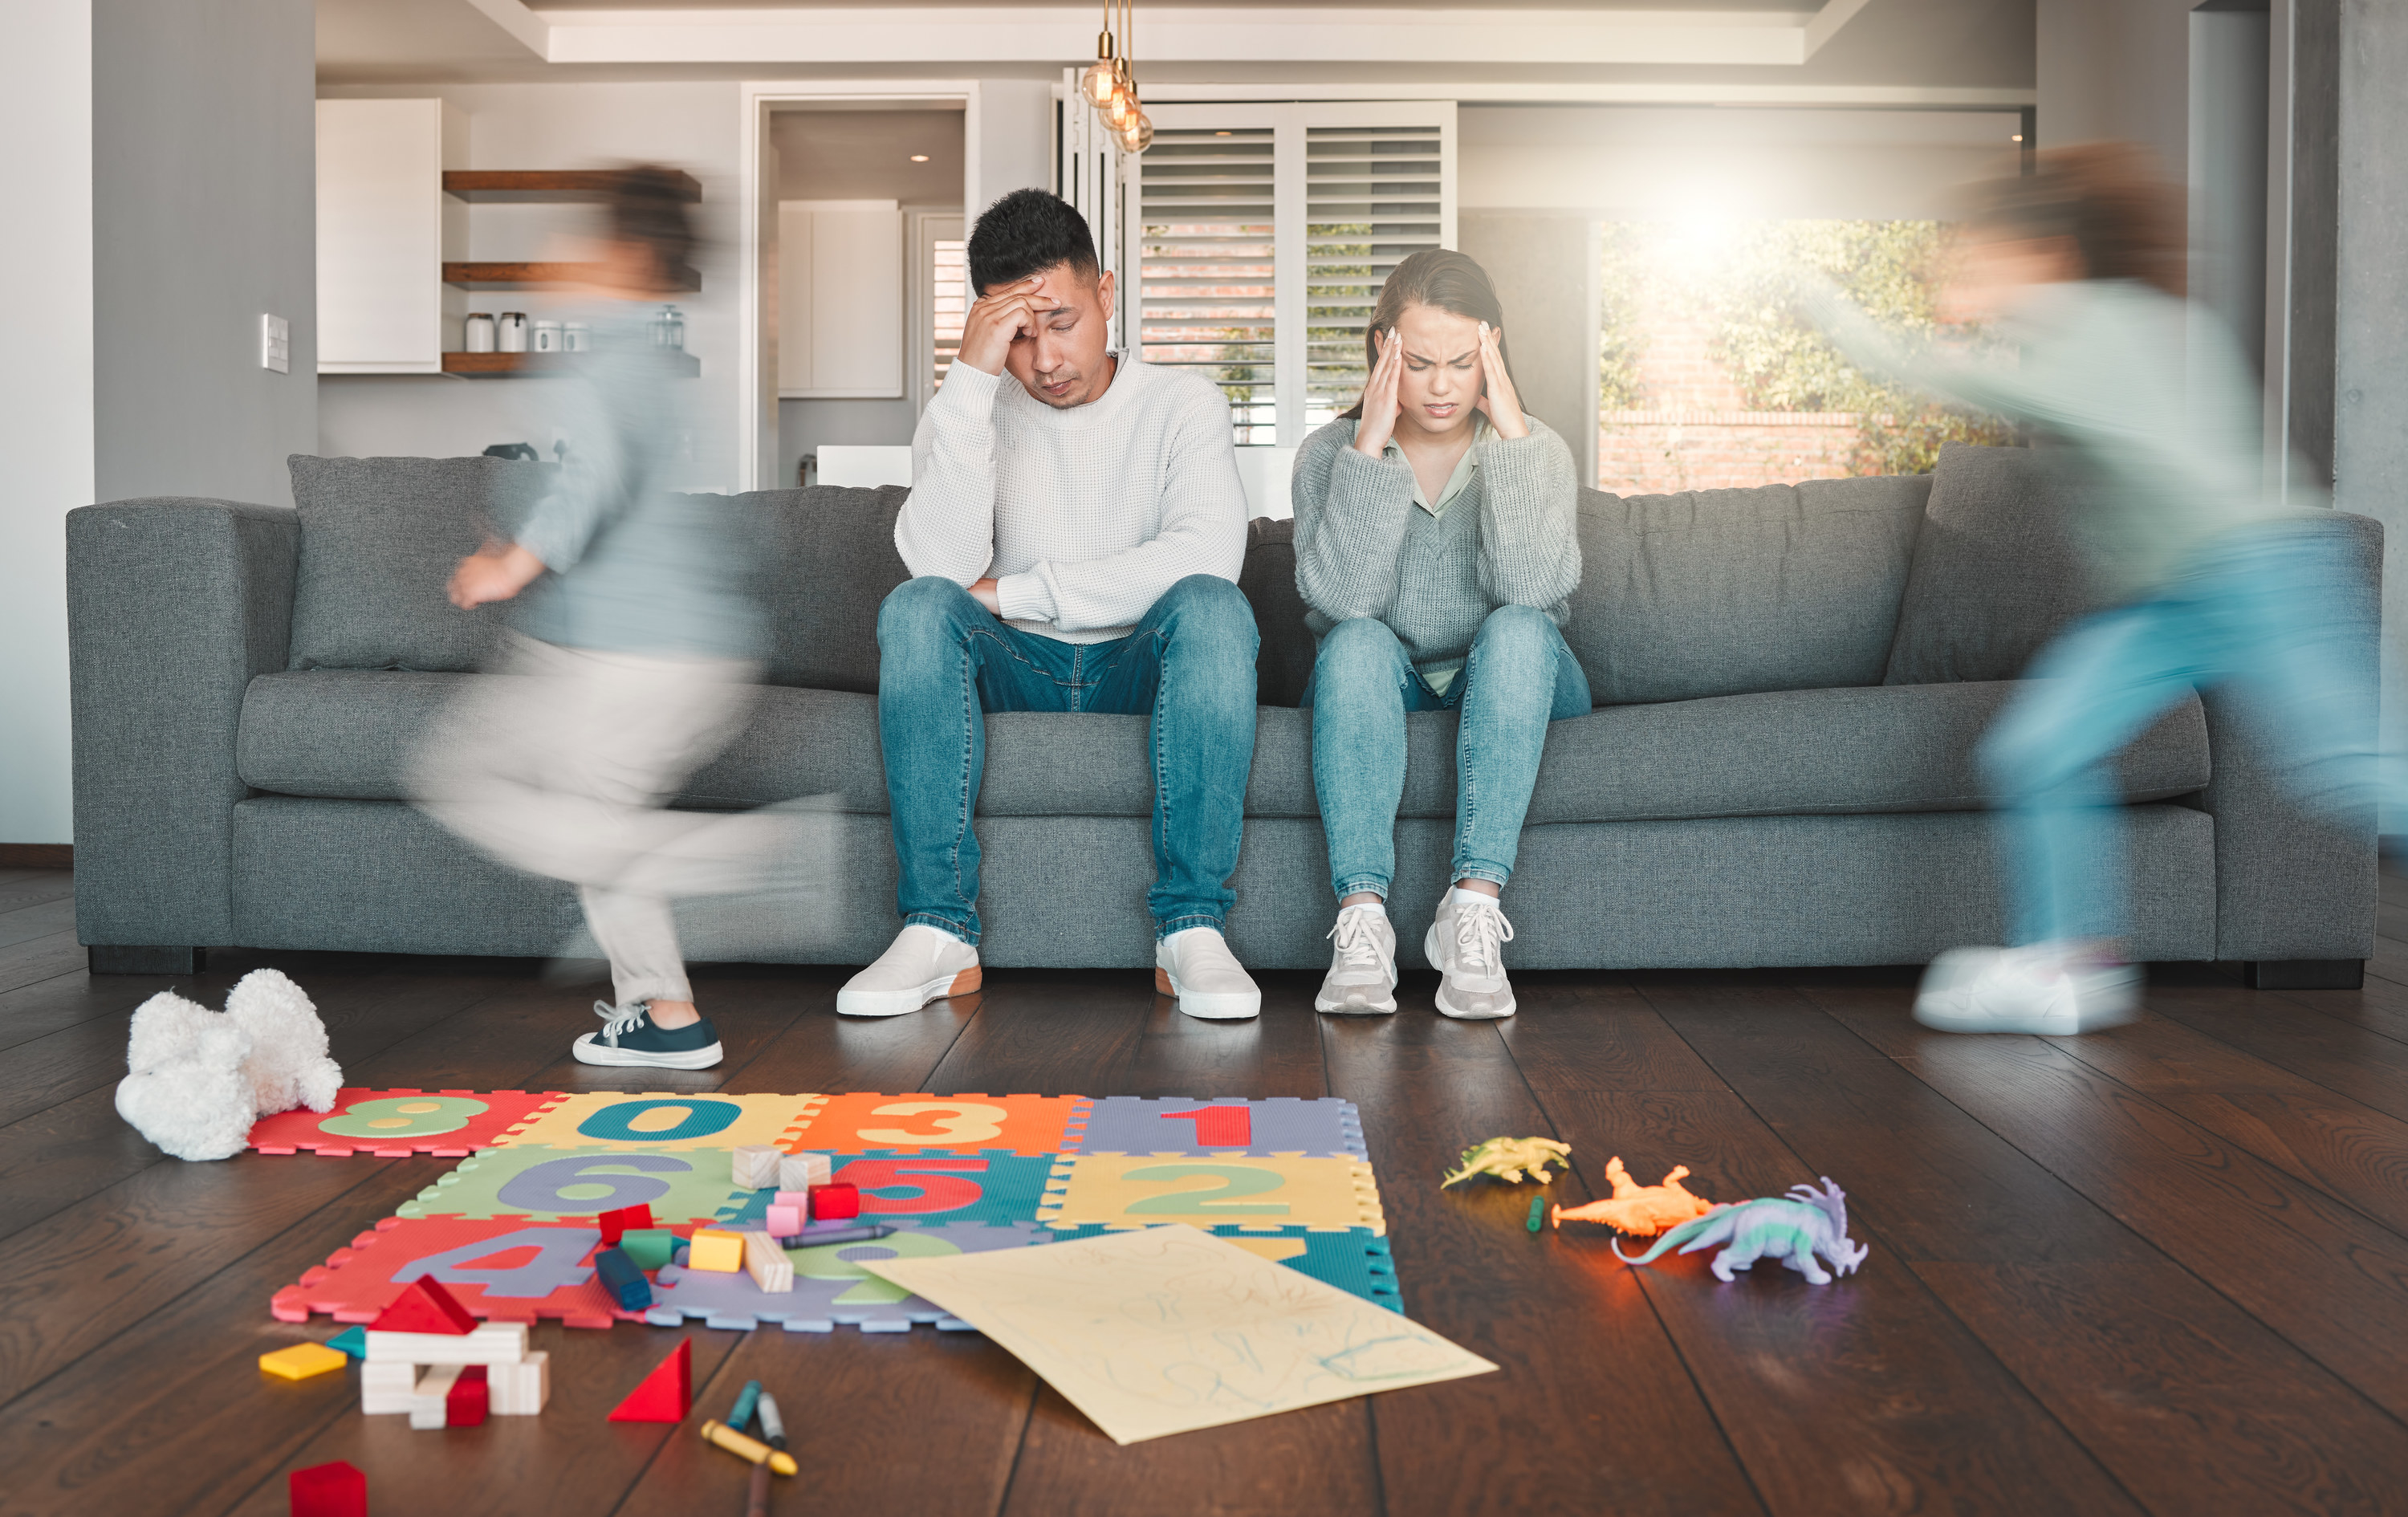 A couple becomes stressed out as their young kids race around the family room